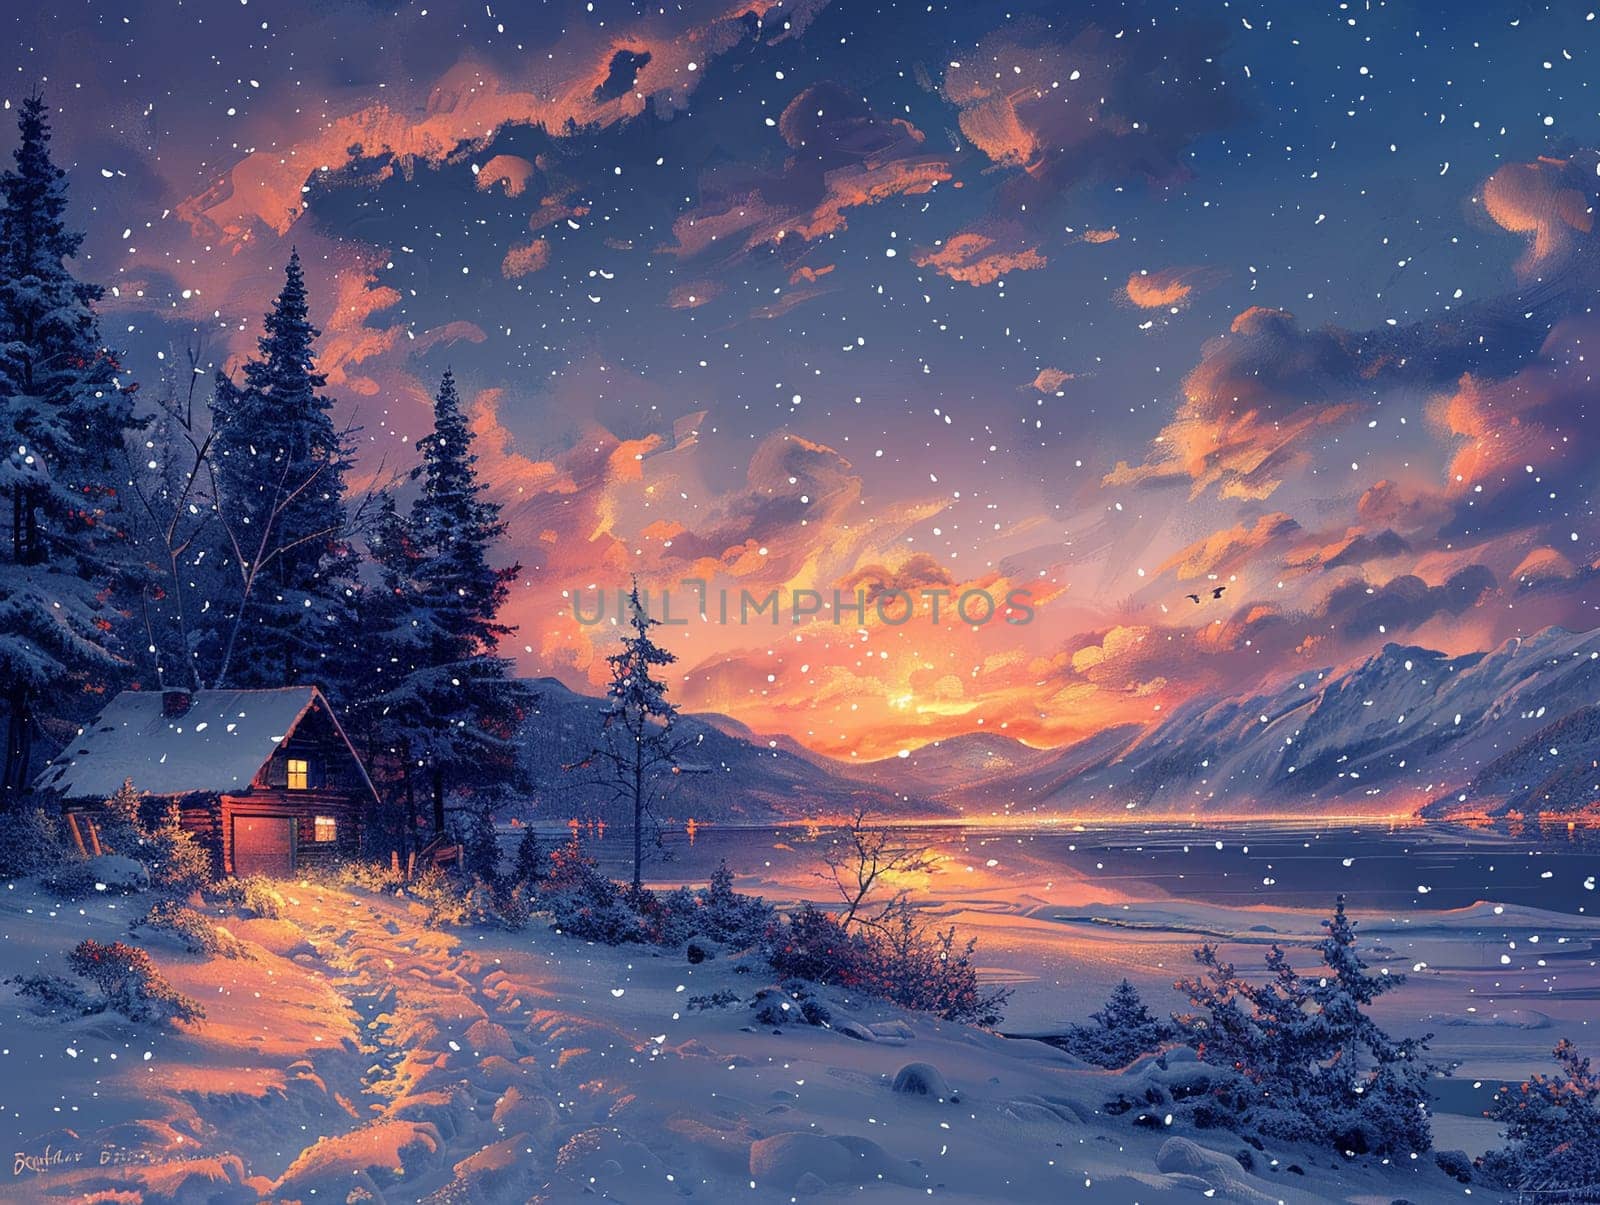 Illustration of a cozy winter cabin in acrylics, drawing attention to the warmth and solitude in a snowy landscape.